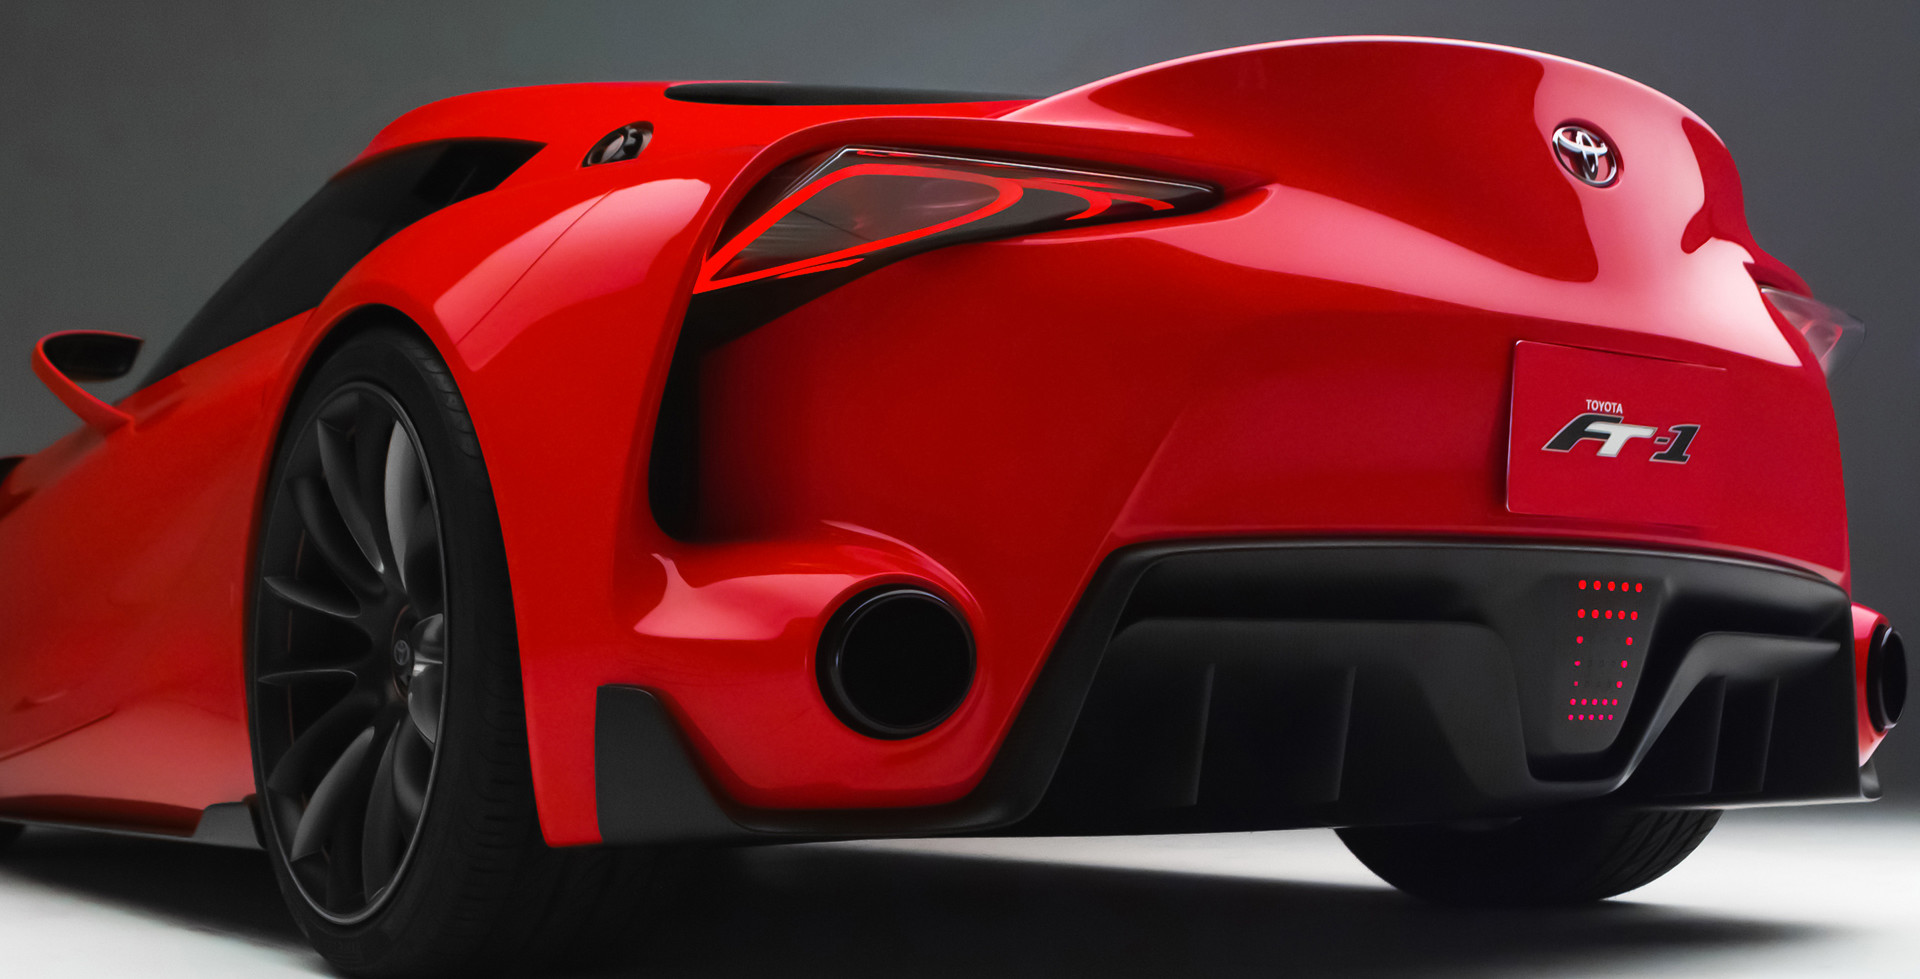 The Toyota FT-1: A Red Hotrod for the Cold Season